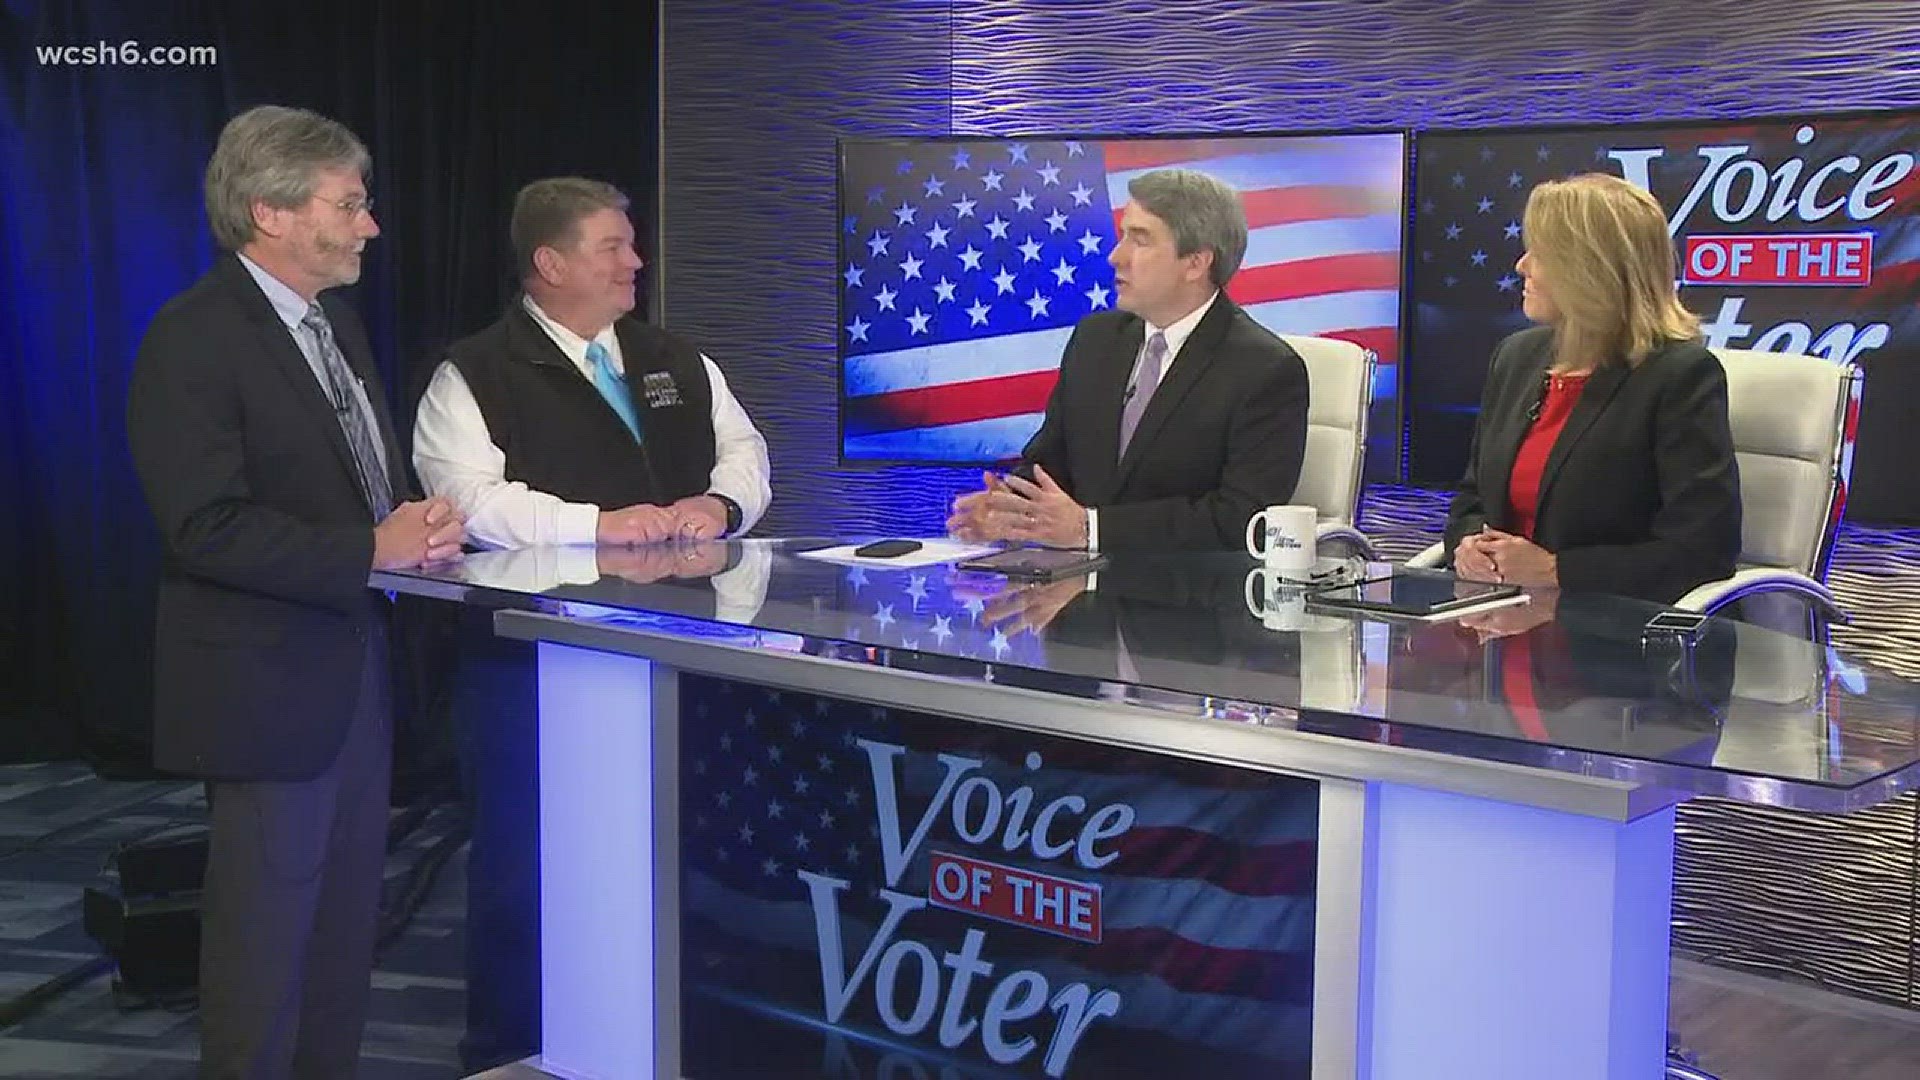 Voice of the Voter joined by Bill Nemitz and Ray Richardson to discuss ballot questions.